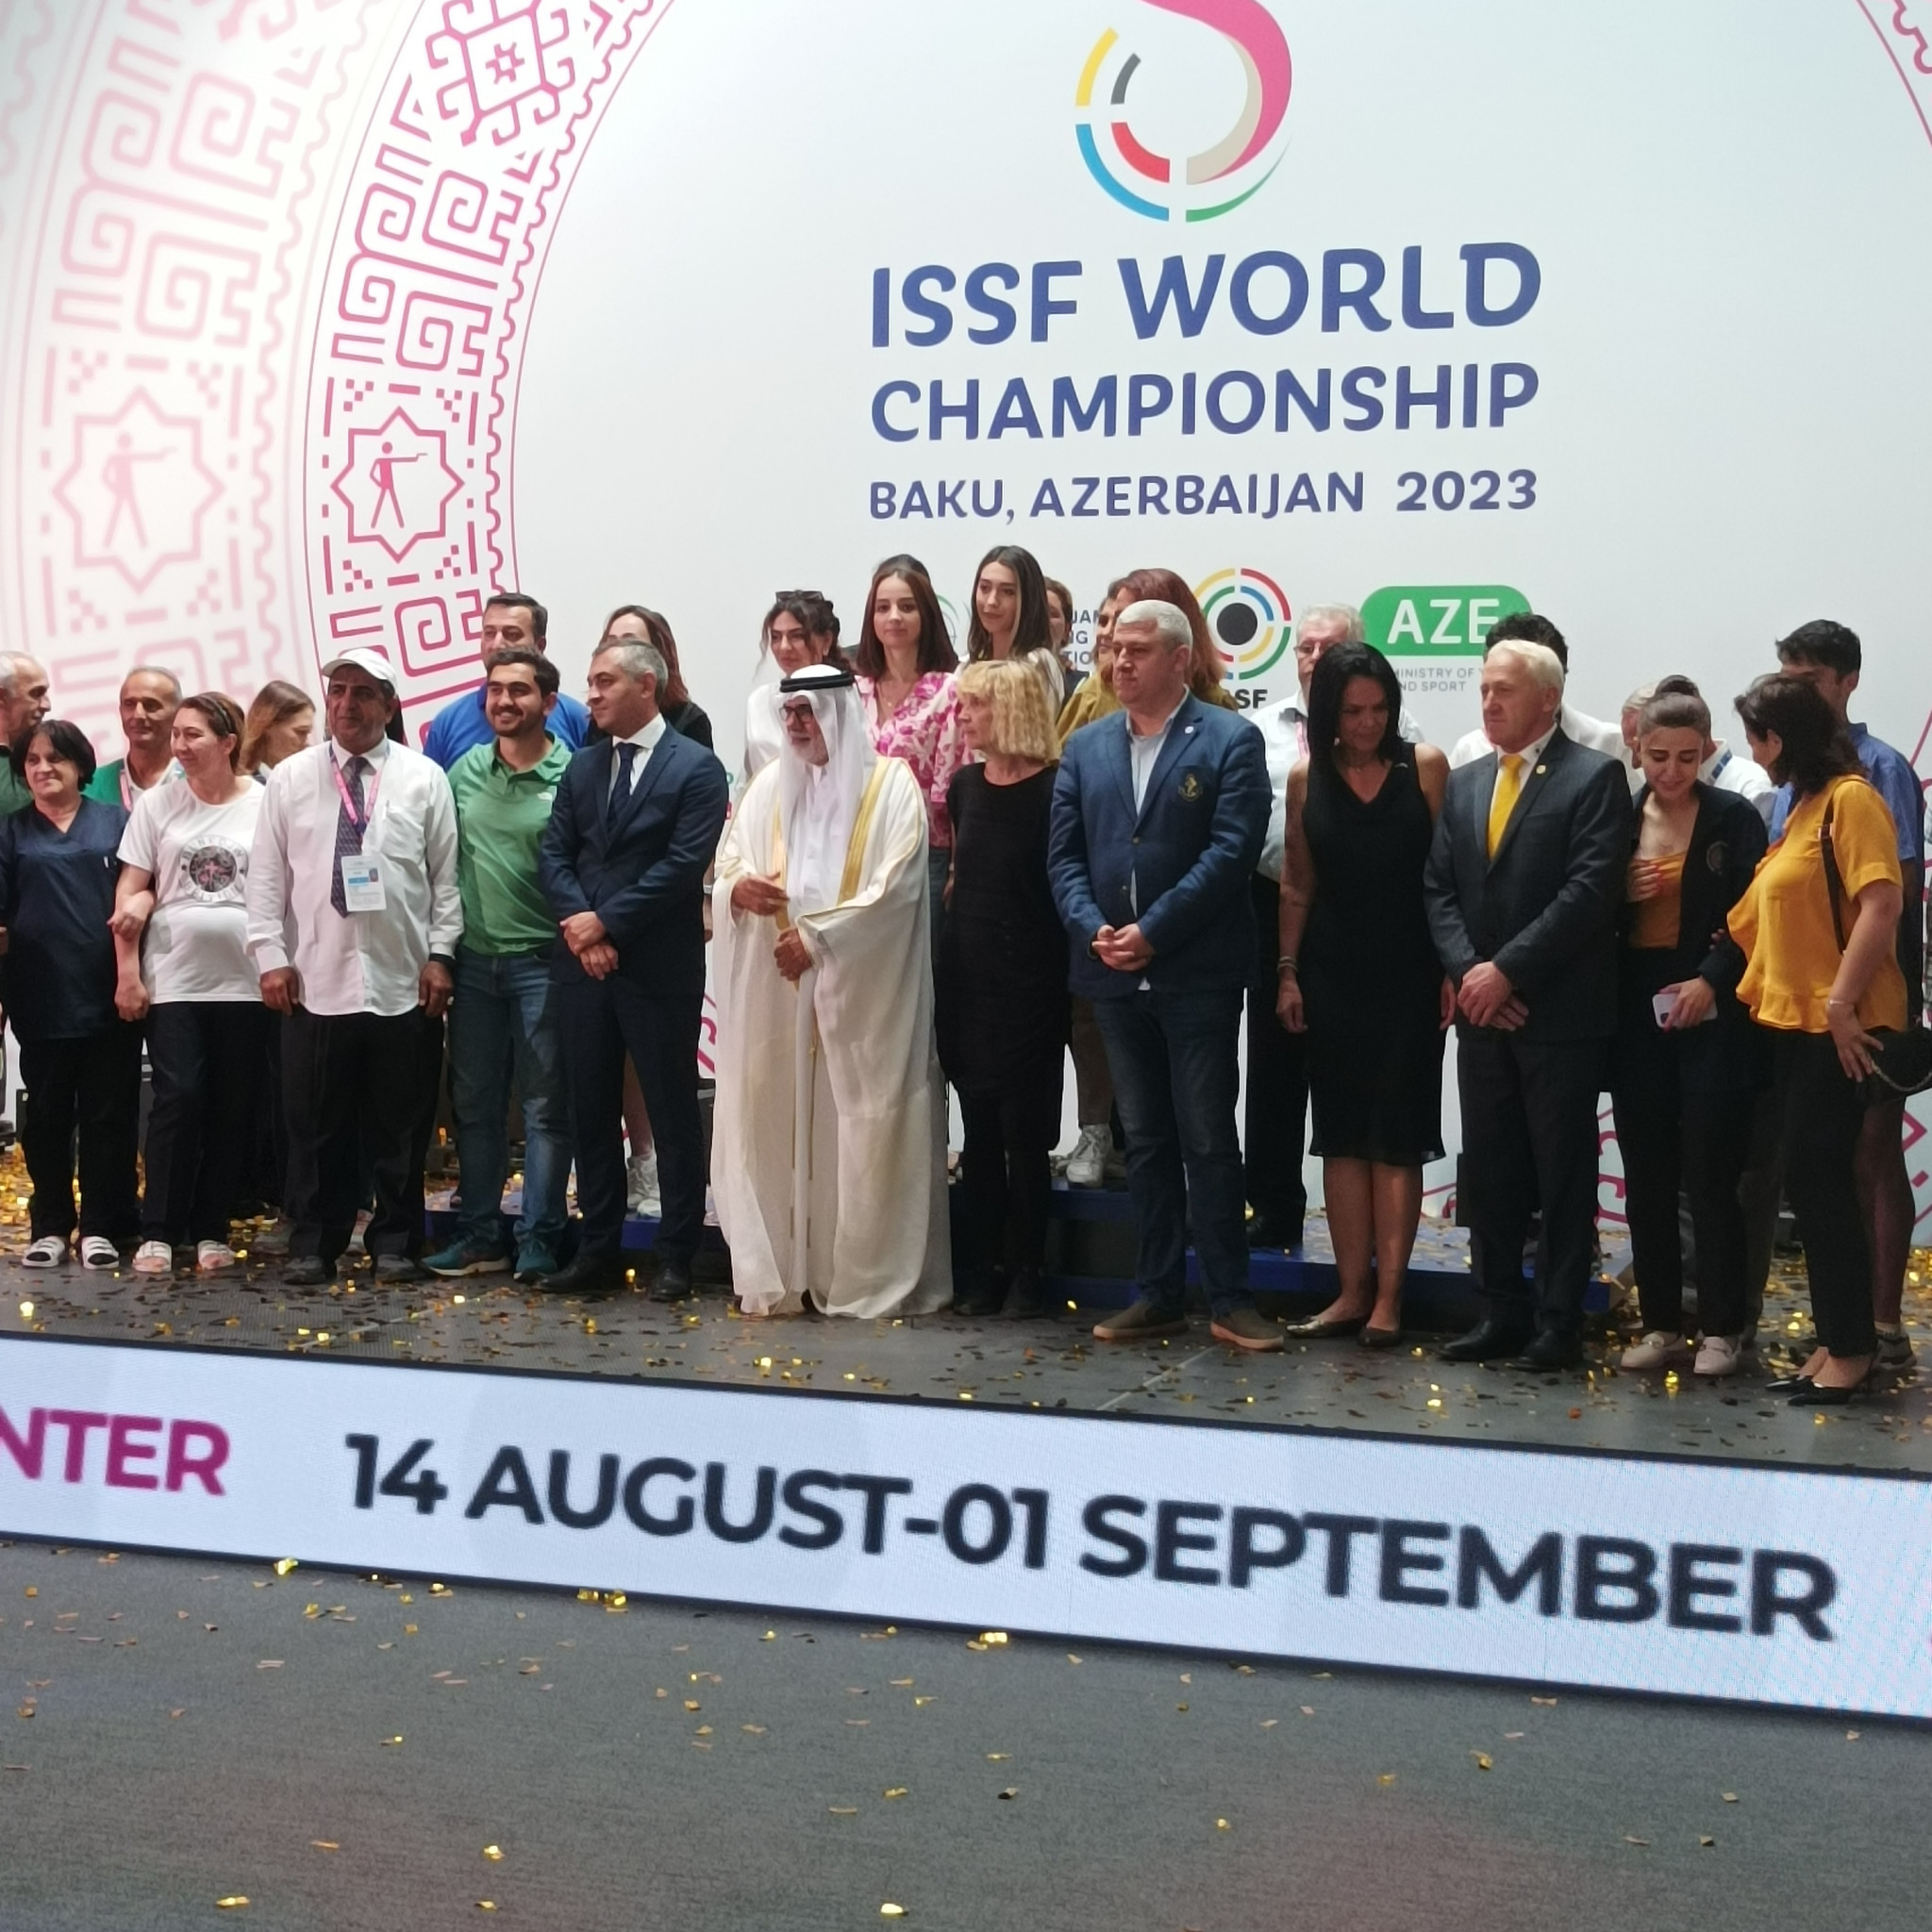 Organisers gather on stage after the conclusion of the ISSF World Championships in Baku ©ITG